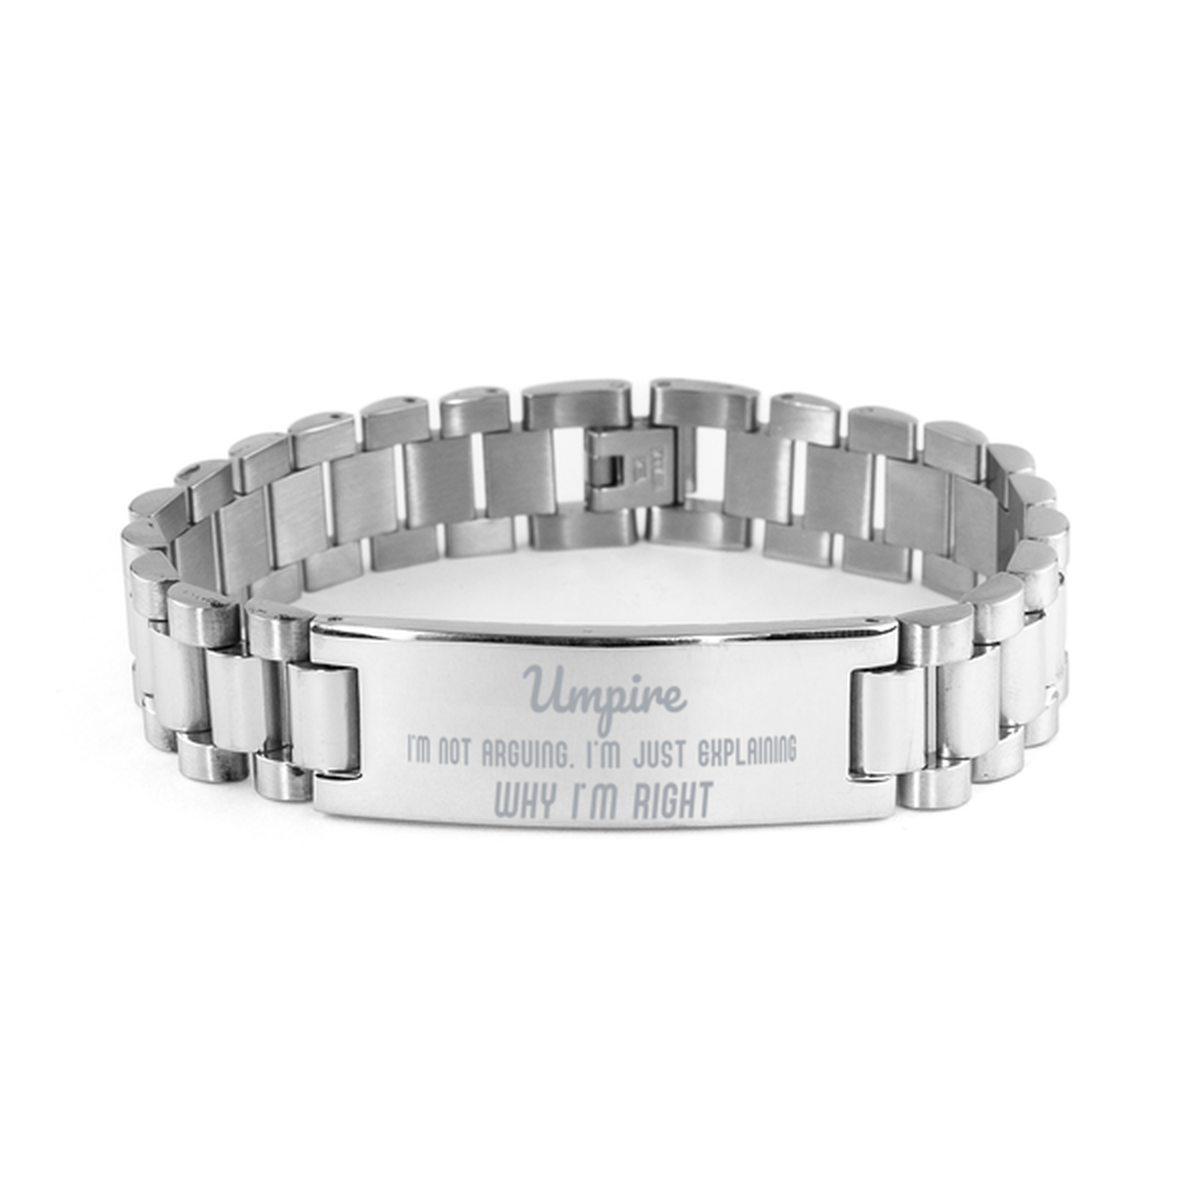 Umpire I'm not Arguing. I'm Just Explaining Why I'm RIGHT Ladder Stainless Steel Bracelet, Graduation Birthday Christmas Umpire Gifts For Umpire Funny Saying Quote Present for Men Women Coworker